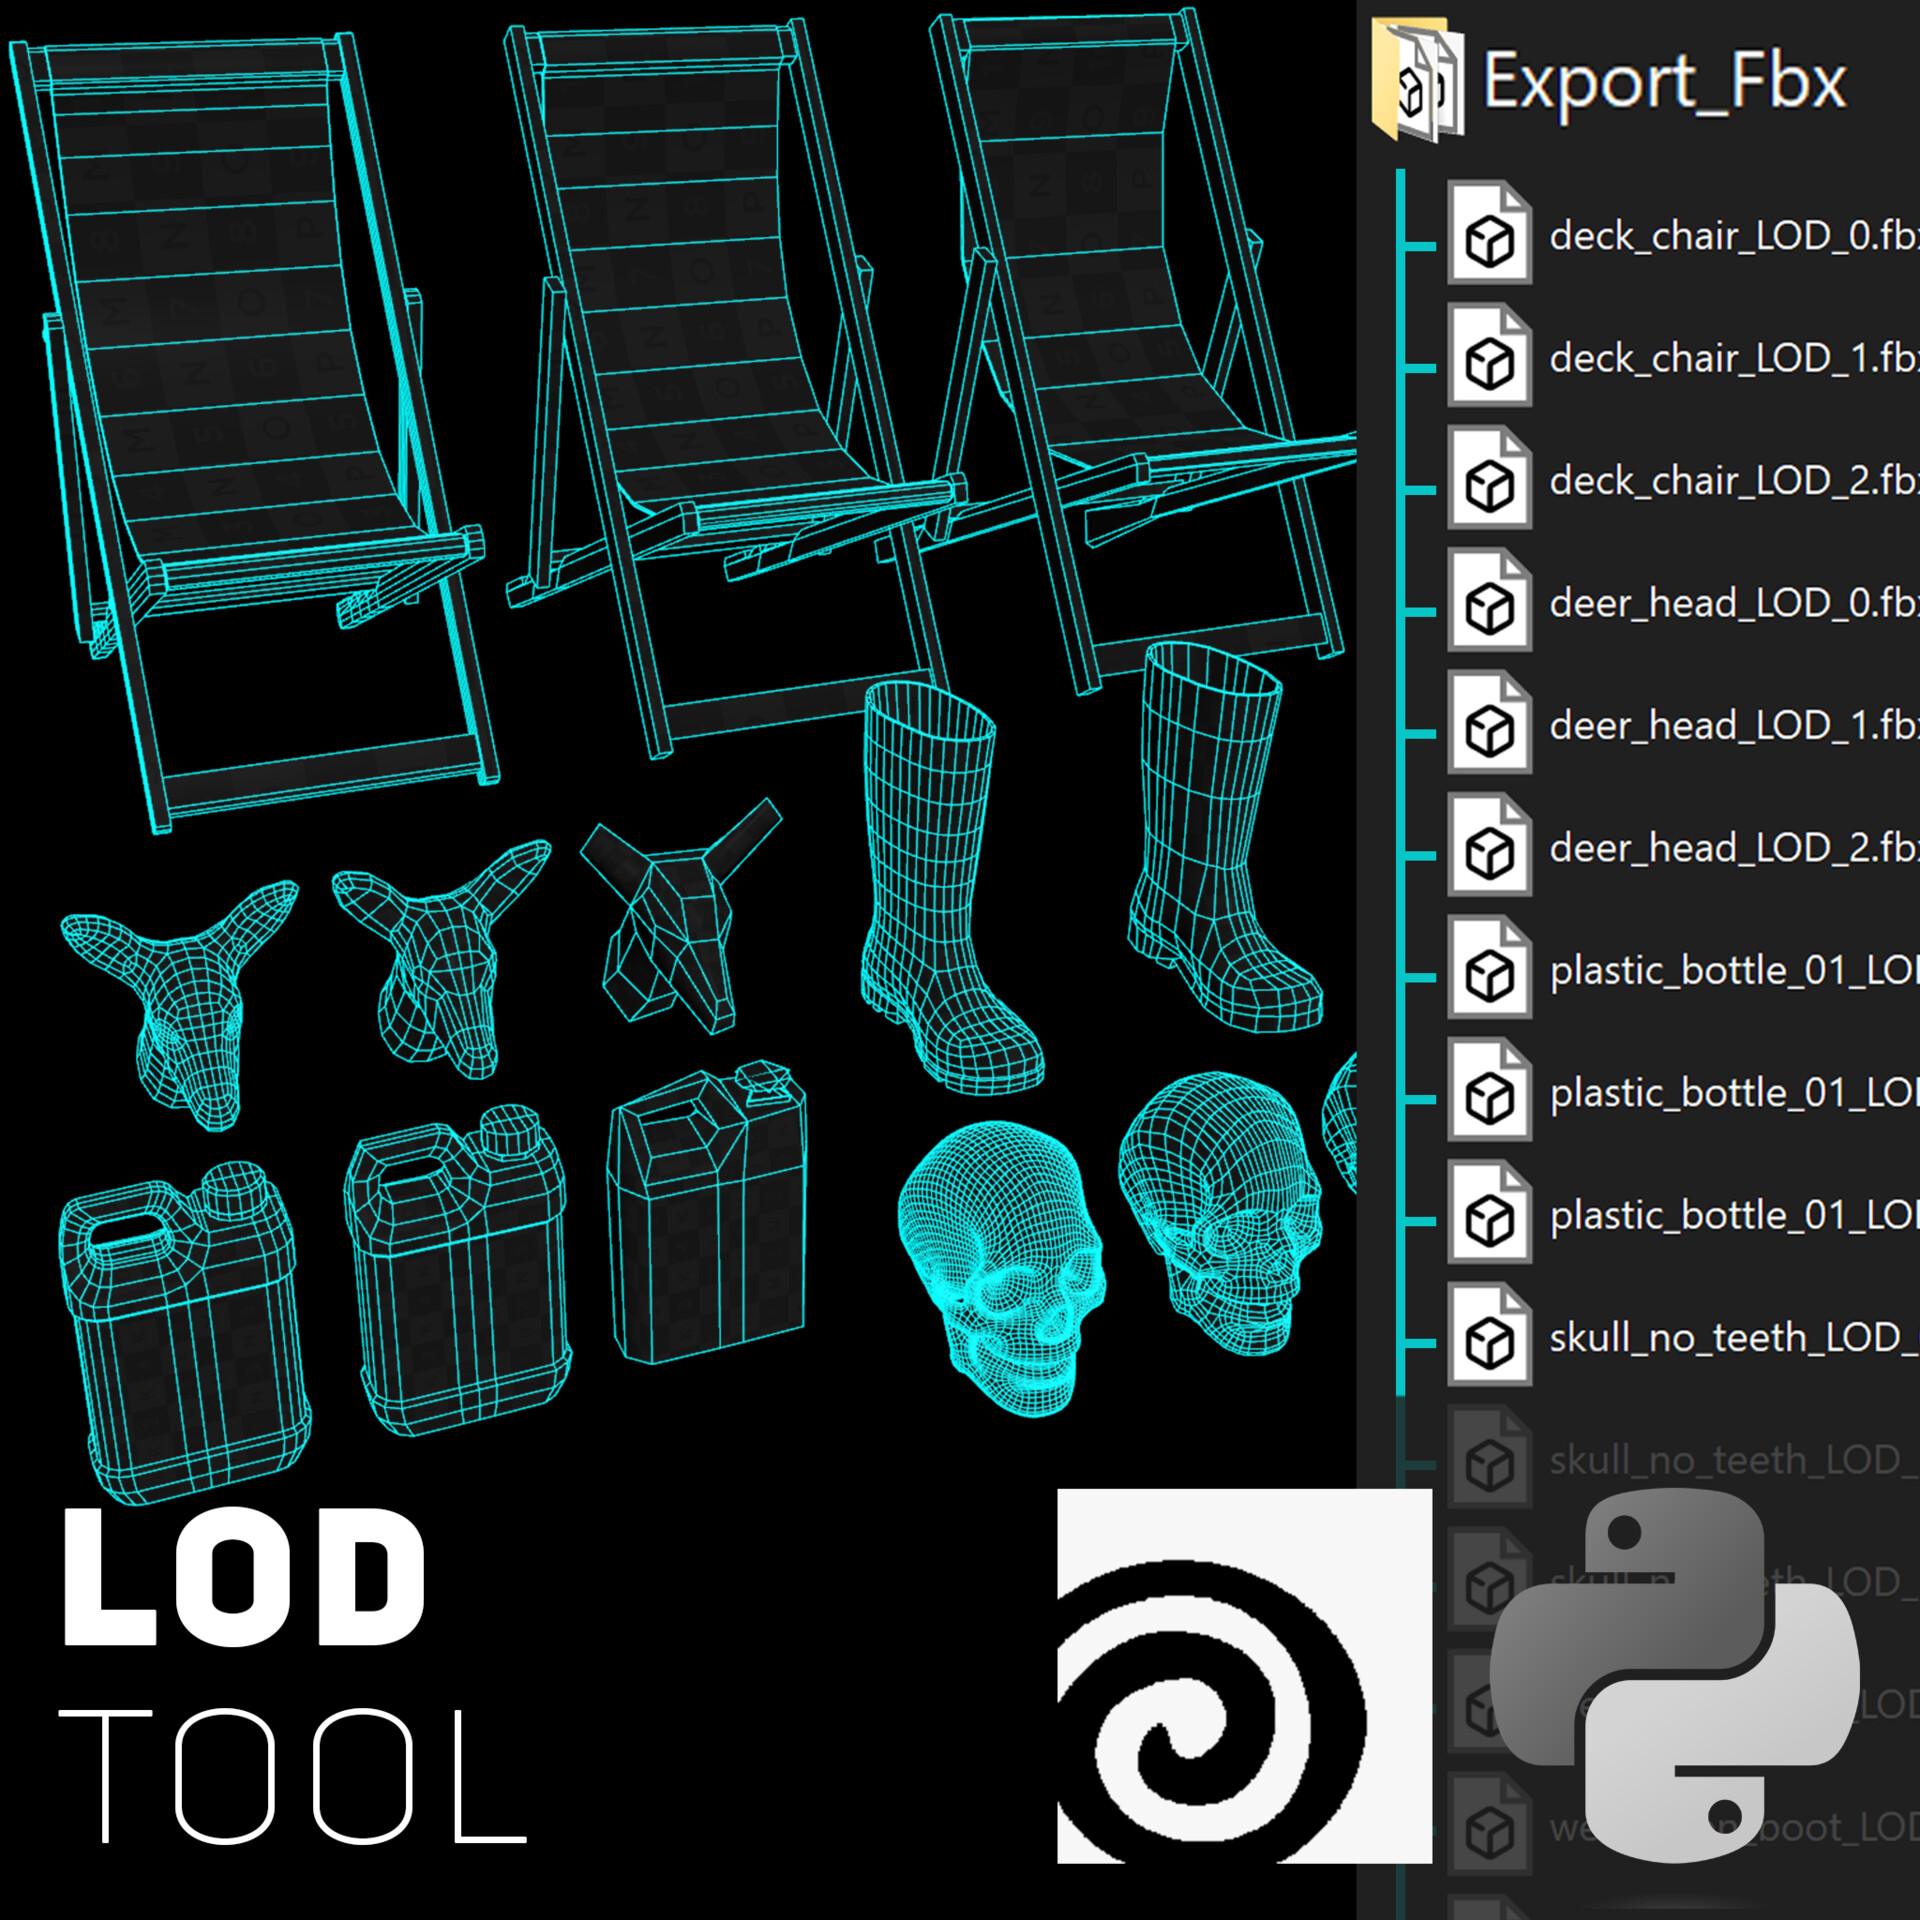 Using the LOD Tool